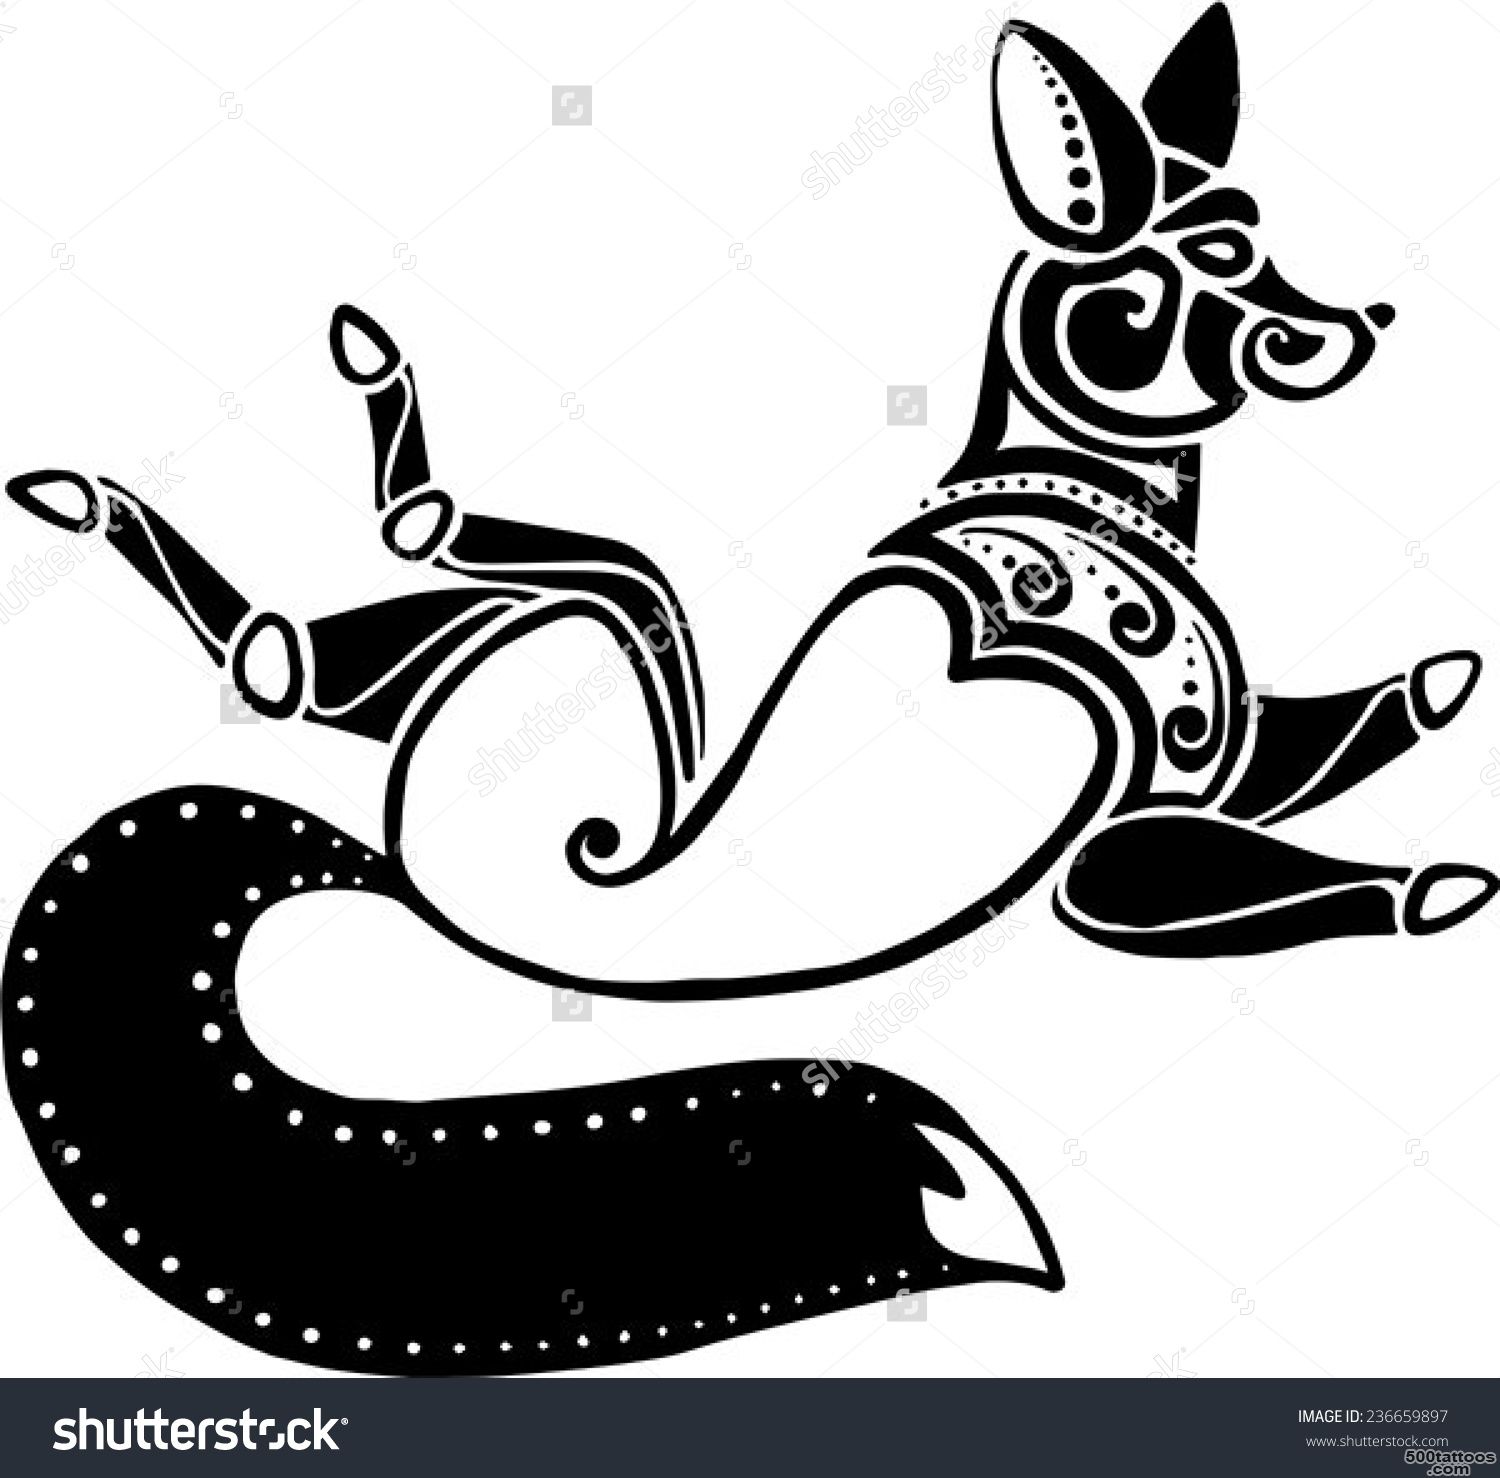 Running Twisted A Fox In Style Of Scythian Tattoos Stock Vector ..._24